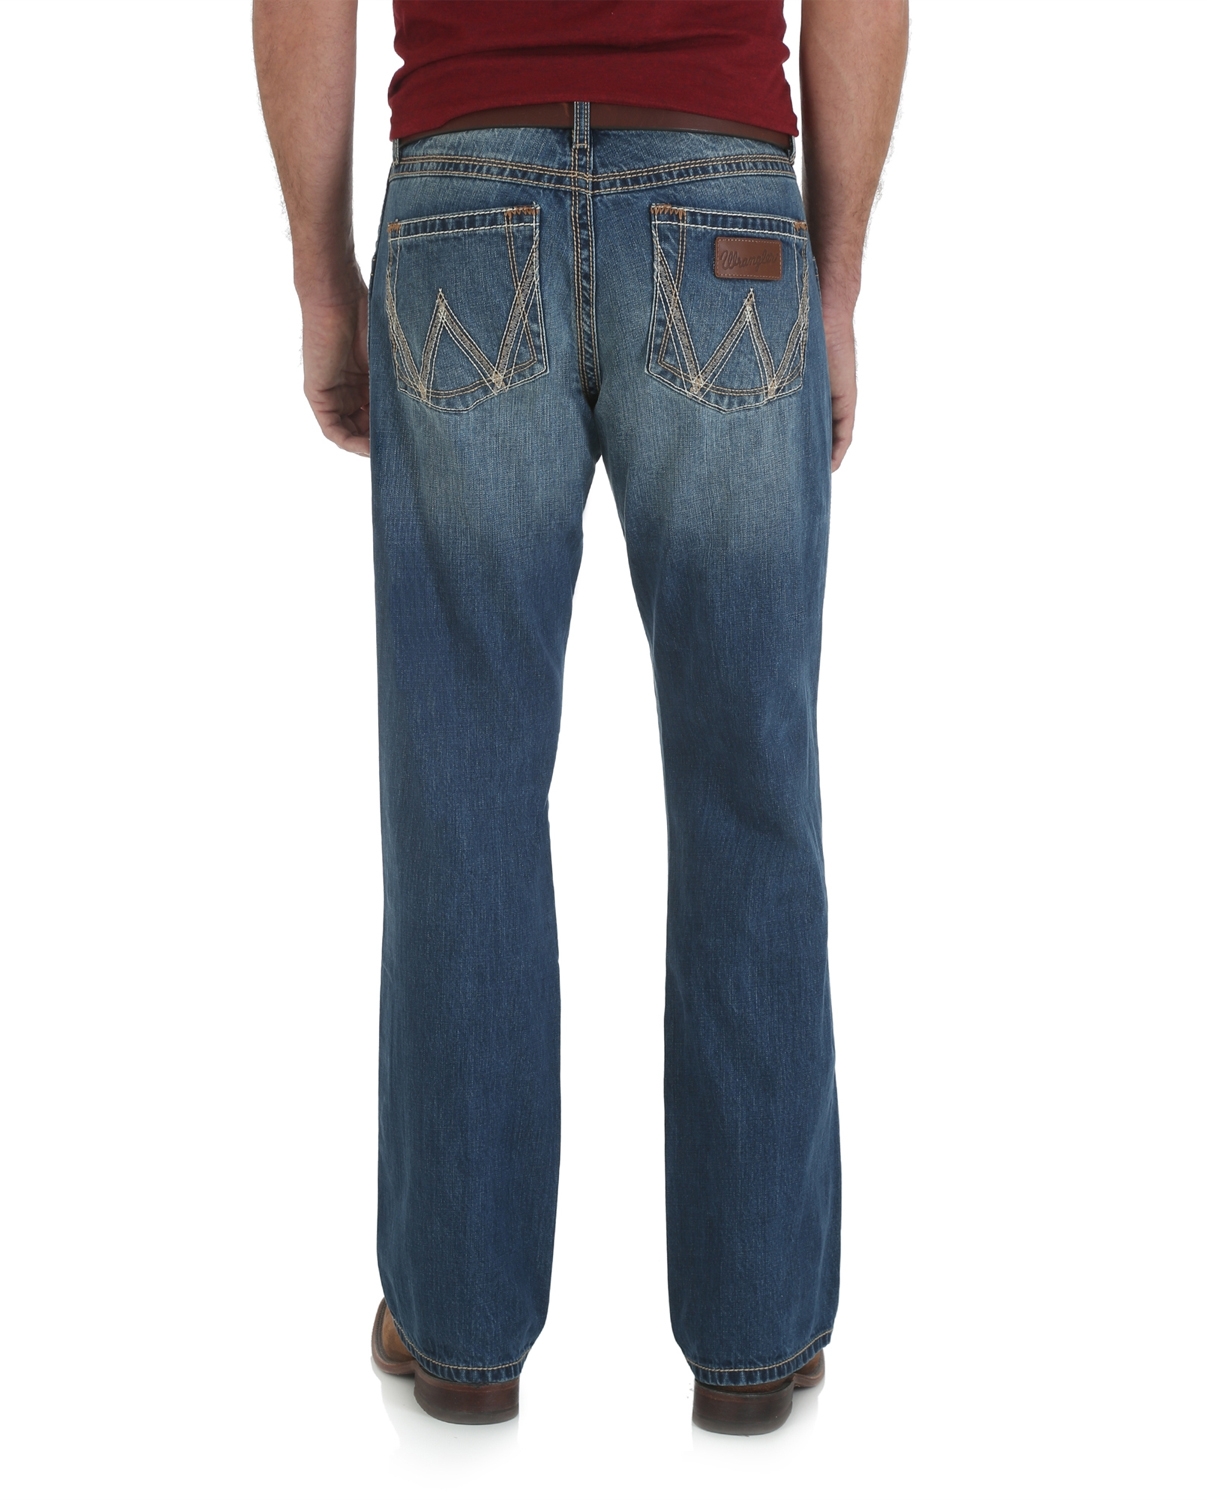 wrangler relaxed fit boot cut jeans